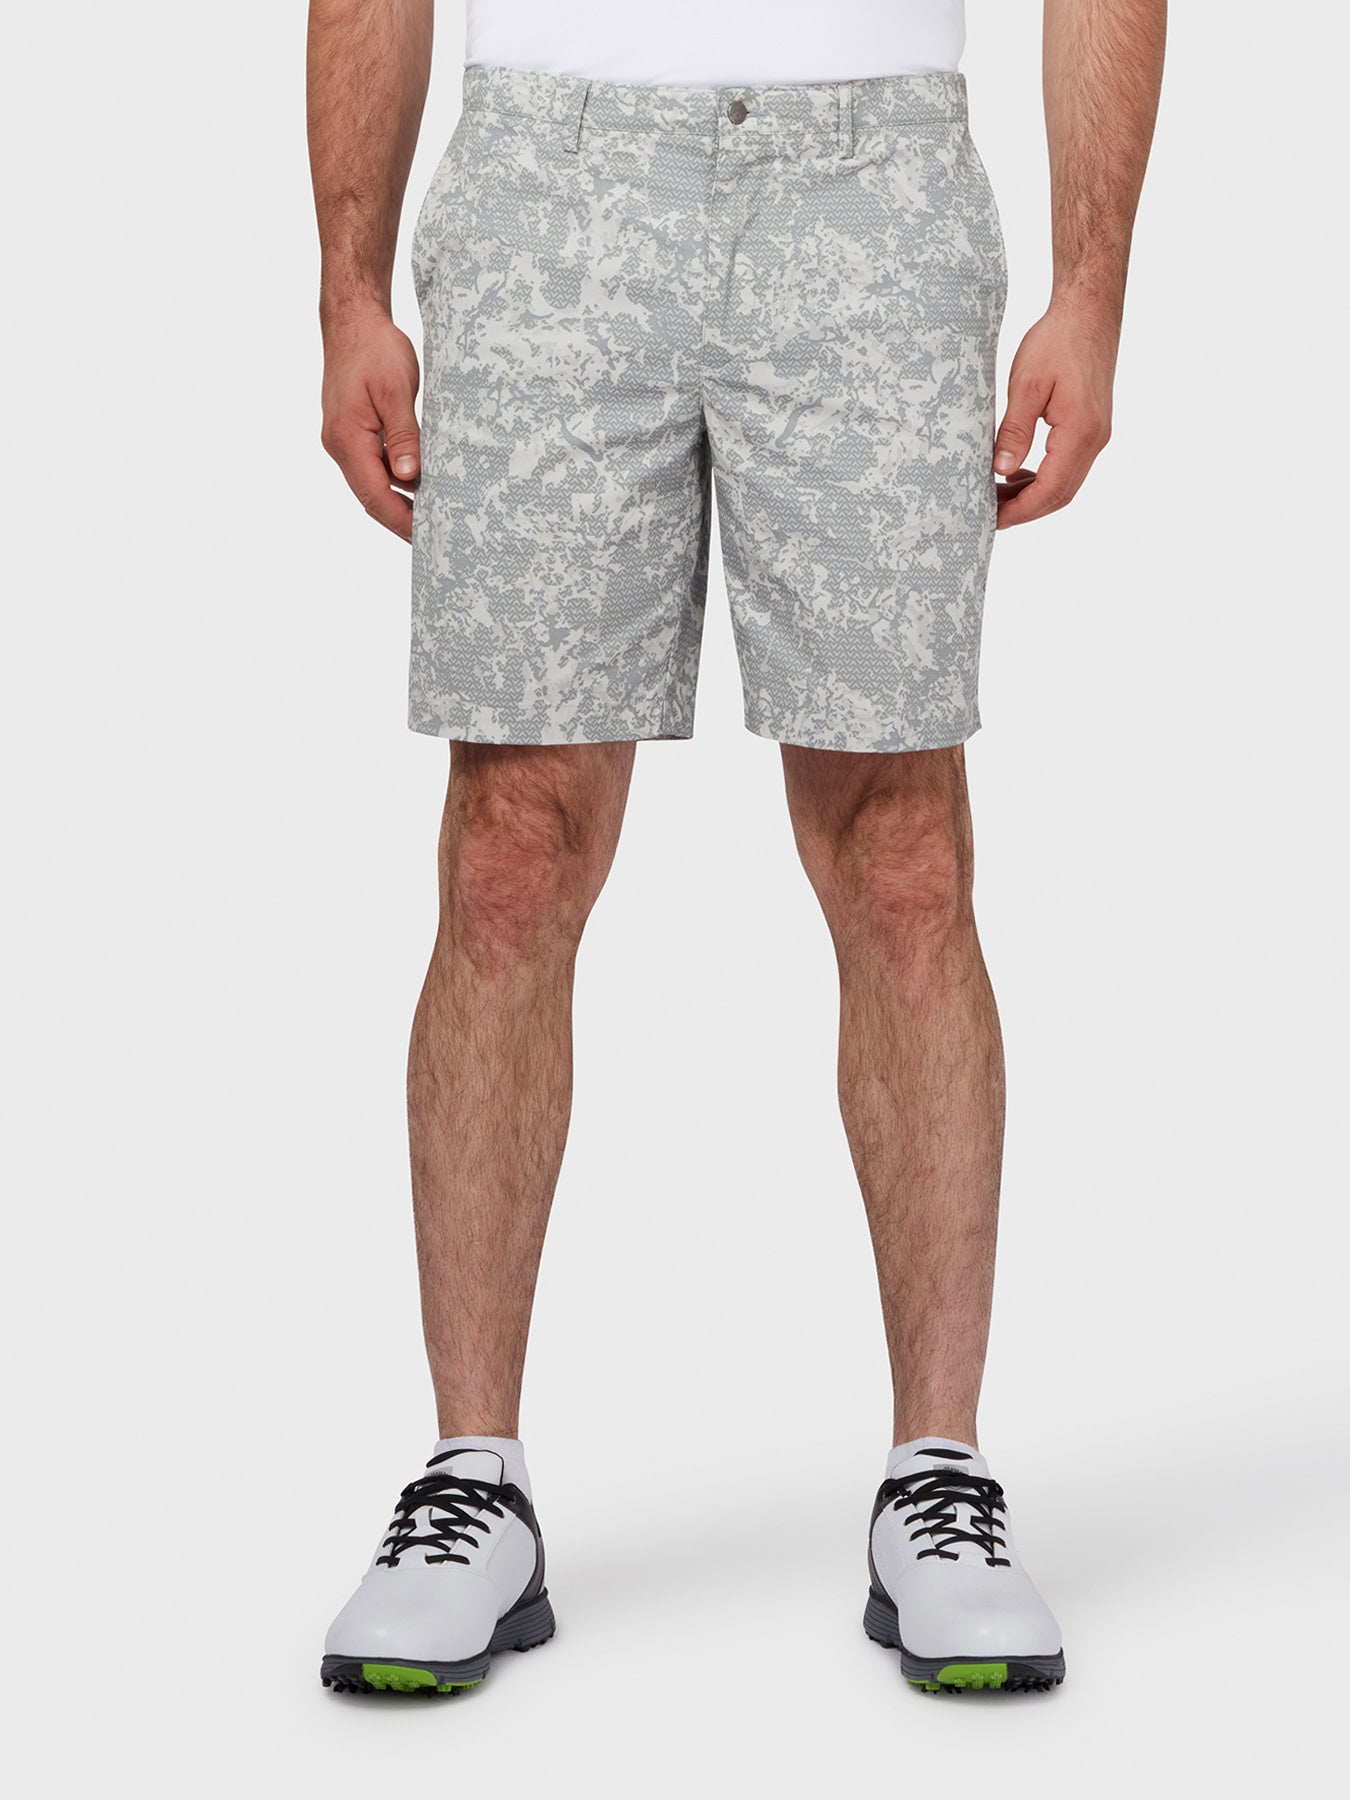 View X Series Abstract Camo Shorts In Quarry Grey Quarry 36 information